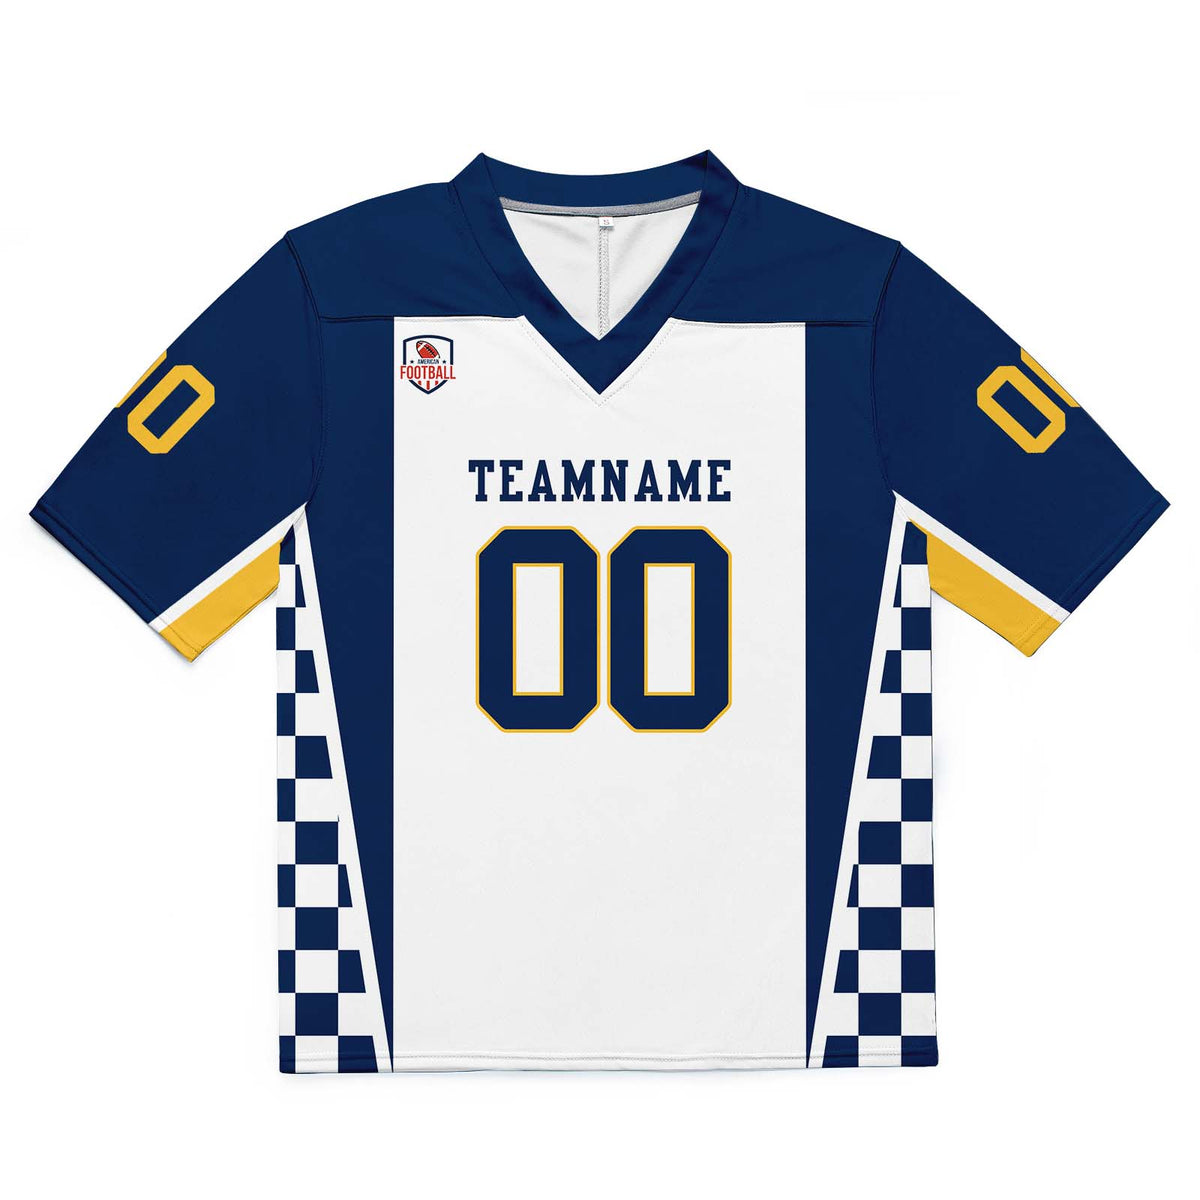 Custom Football Jersey Shirt Personalized Stitched Printed Team Name Number Navy & White